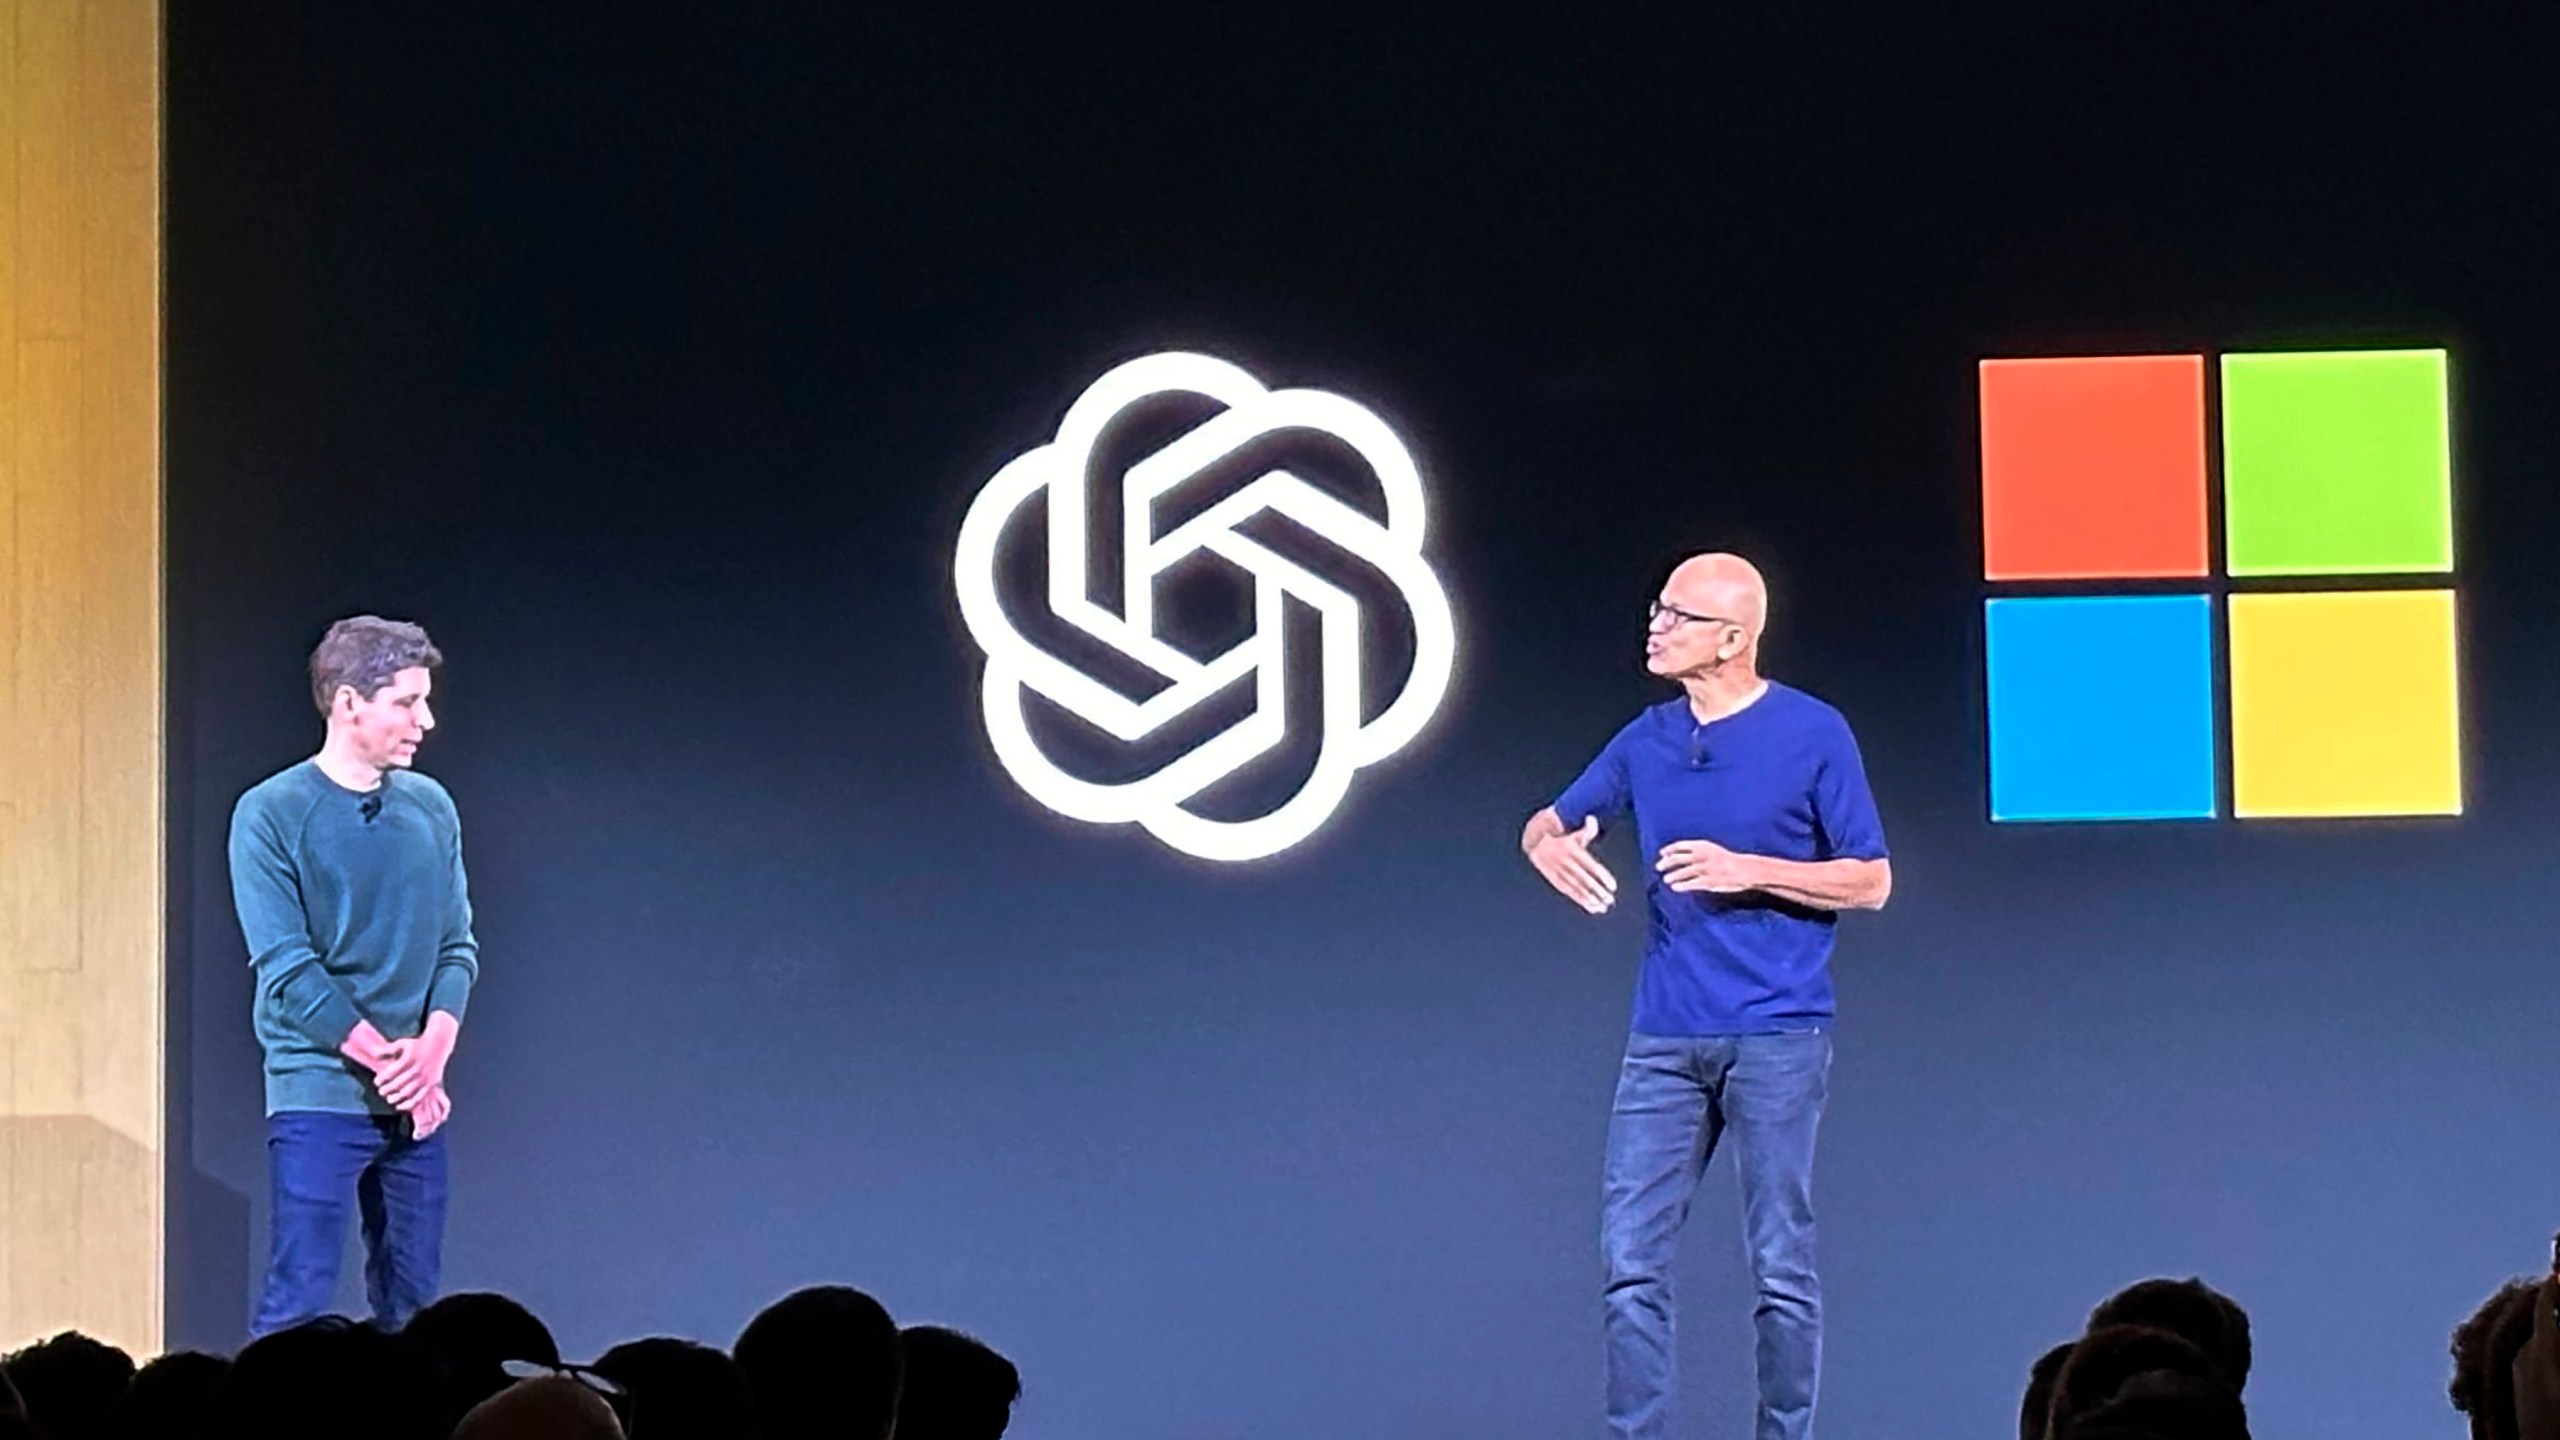 File - OpenAI CEO Sam Altman, left, appears onstage with Microsoft CEO Satya Nadella at OpenAI's first developer conference, on Nov. 6, 2023, in San Francisco. Negotiators will meet this week to hammer out details of European Union artificial intelligence rules but the process has been bogged down by a simmering last-minute battle over how to govern systems that underpin general purpose AI services like OpenAI's ChatGPT and Google's Bard chatbot. (AP Photo/Barbara Ortutay, File)